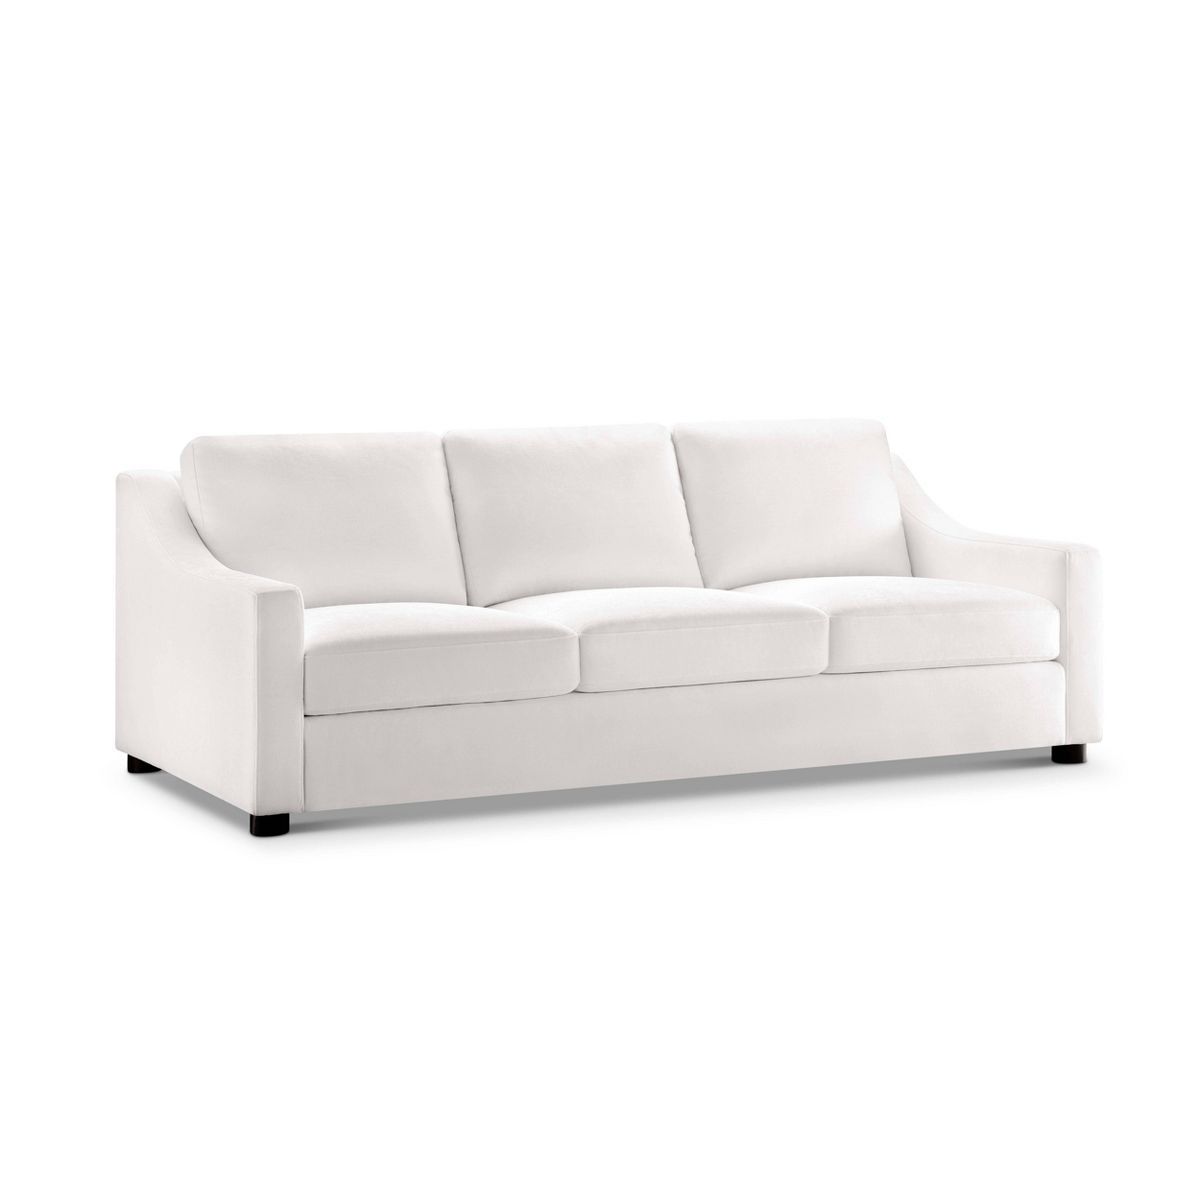 Garcelle Stain Resistant Fabric Sofa - Abbyson Living | Target